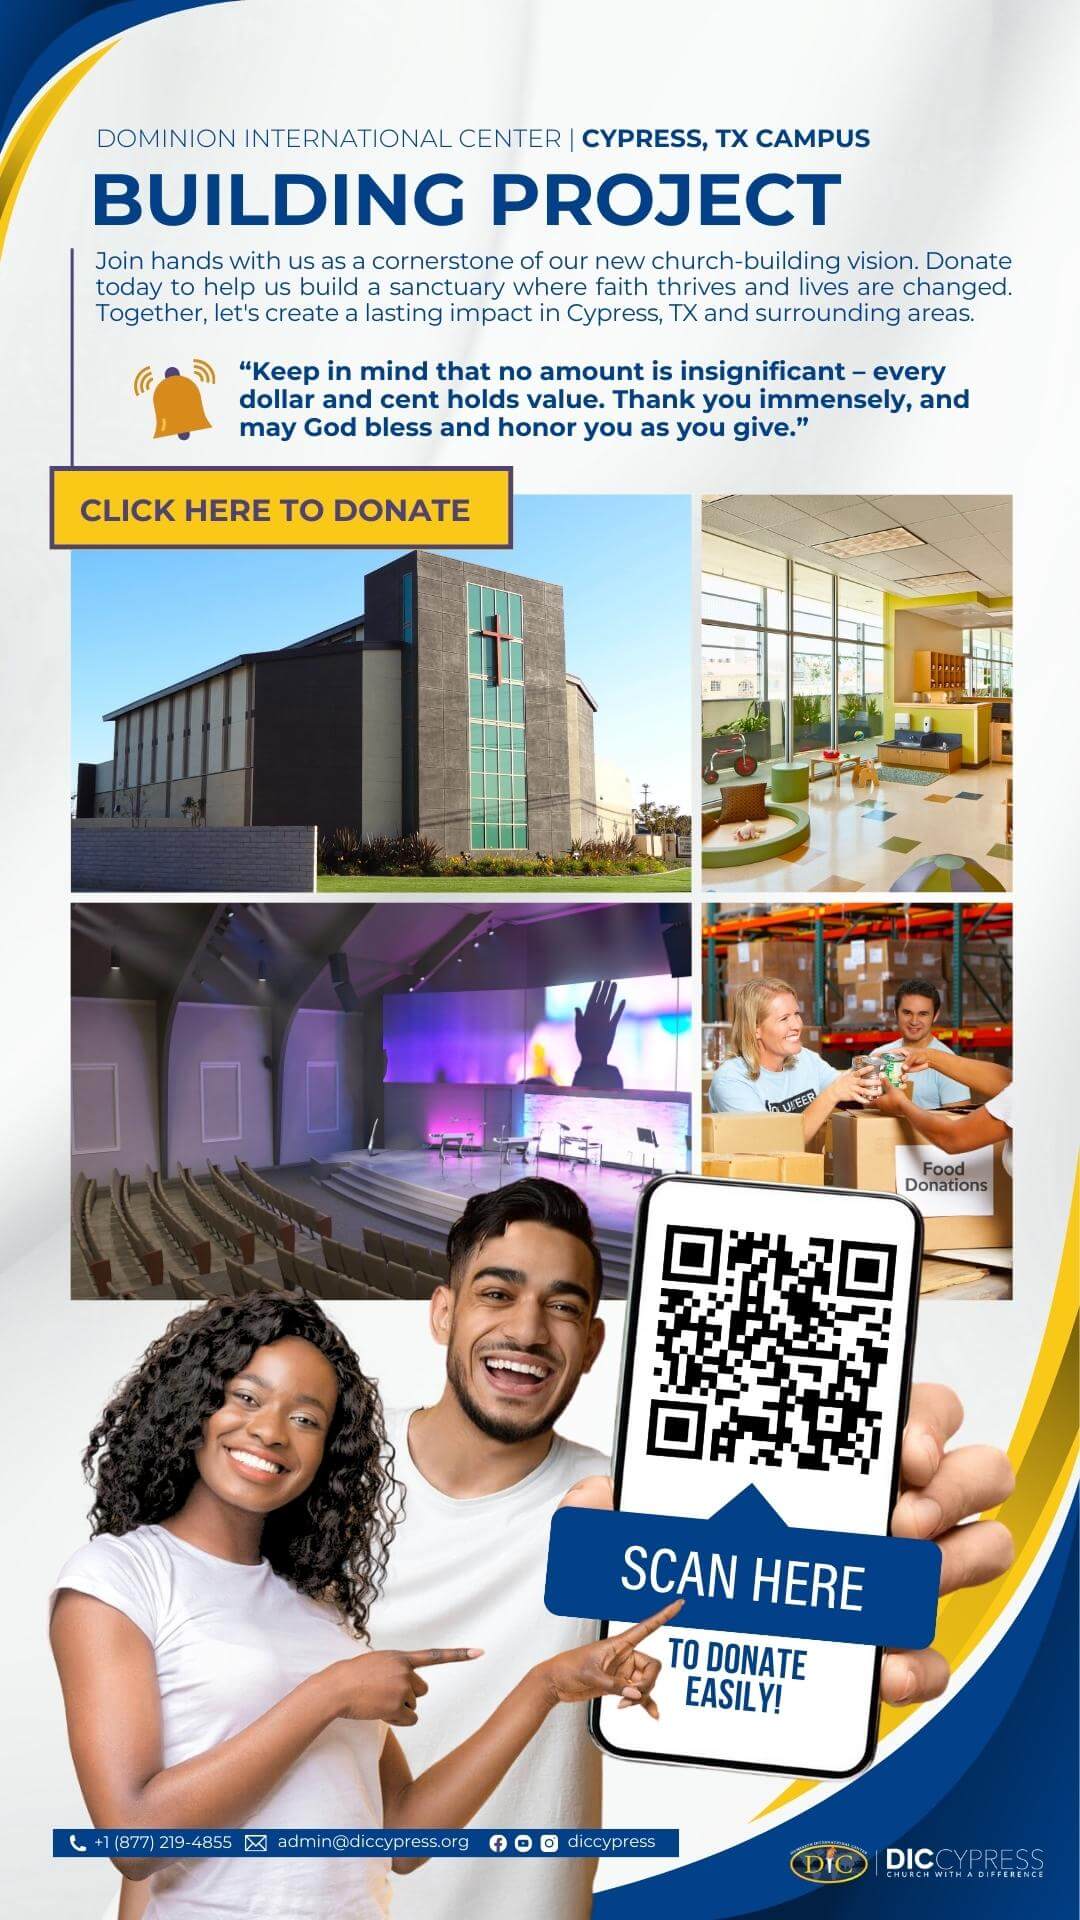 QR code for donating to Dominion International Center Cypress TX campus.